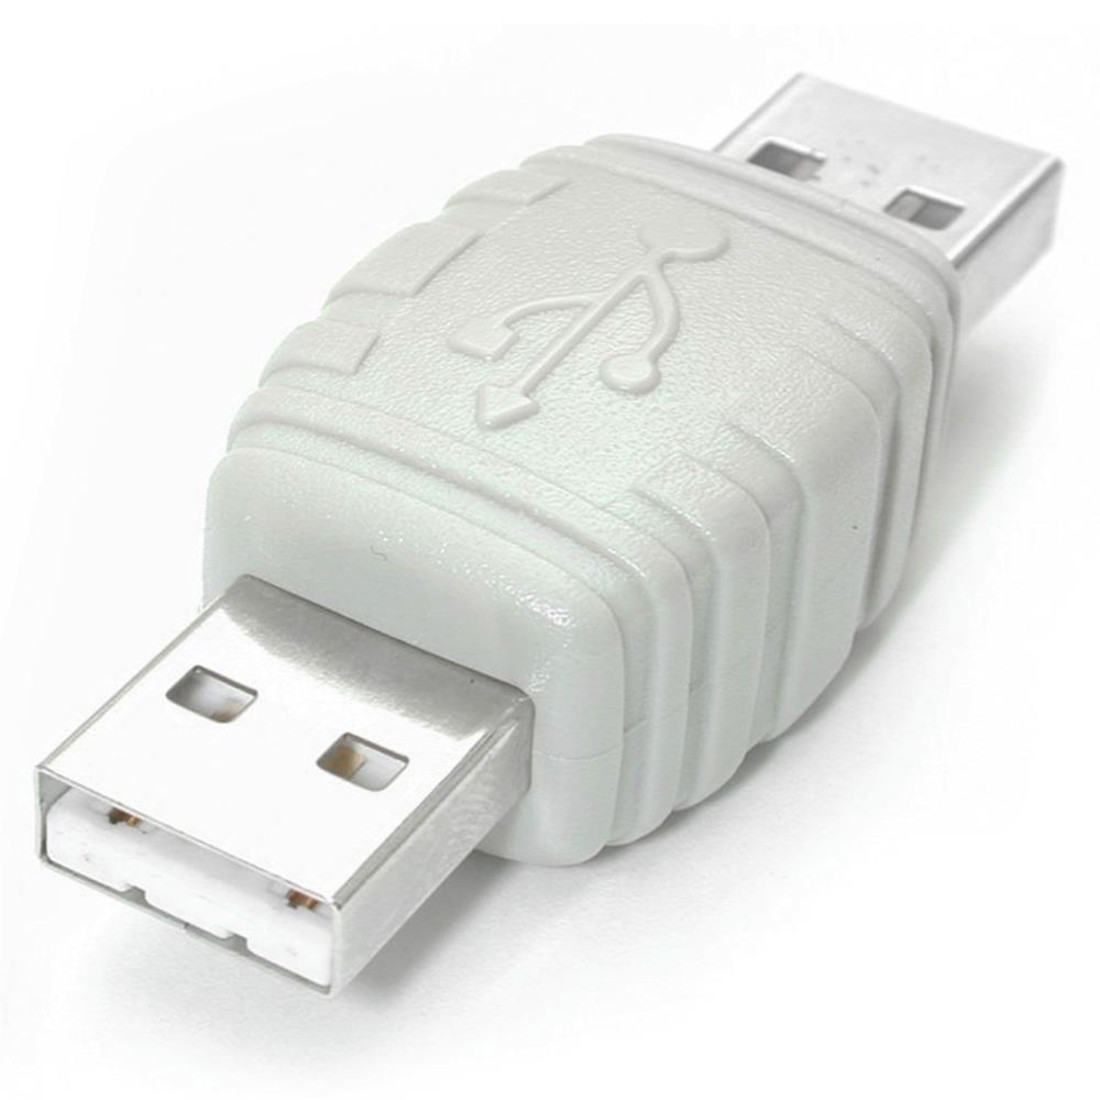 Startech .com USB A to USB A Cable Adapter M/M1 x Type A Male USB1 x Type A Male USBWhite GCUSBAAMM